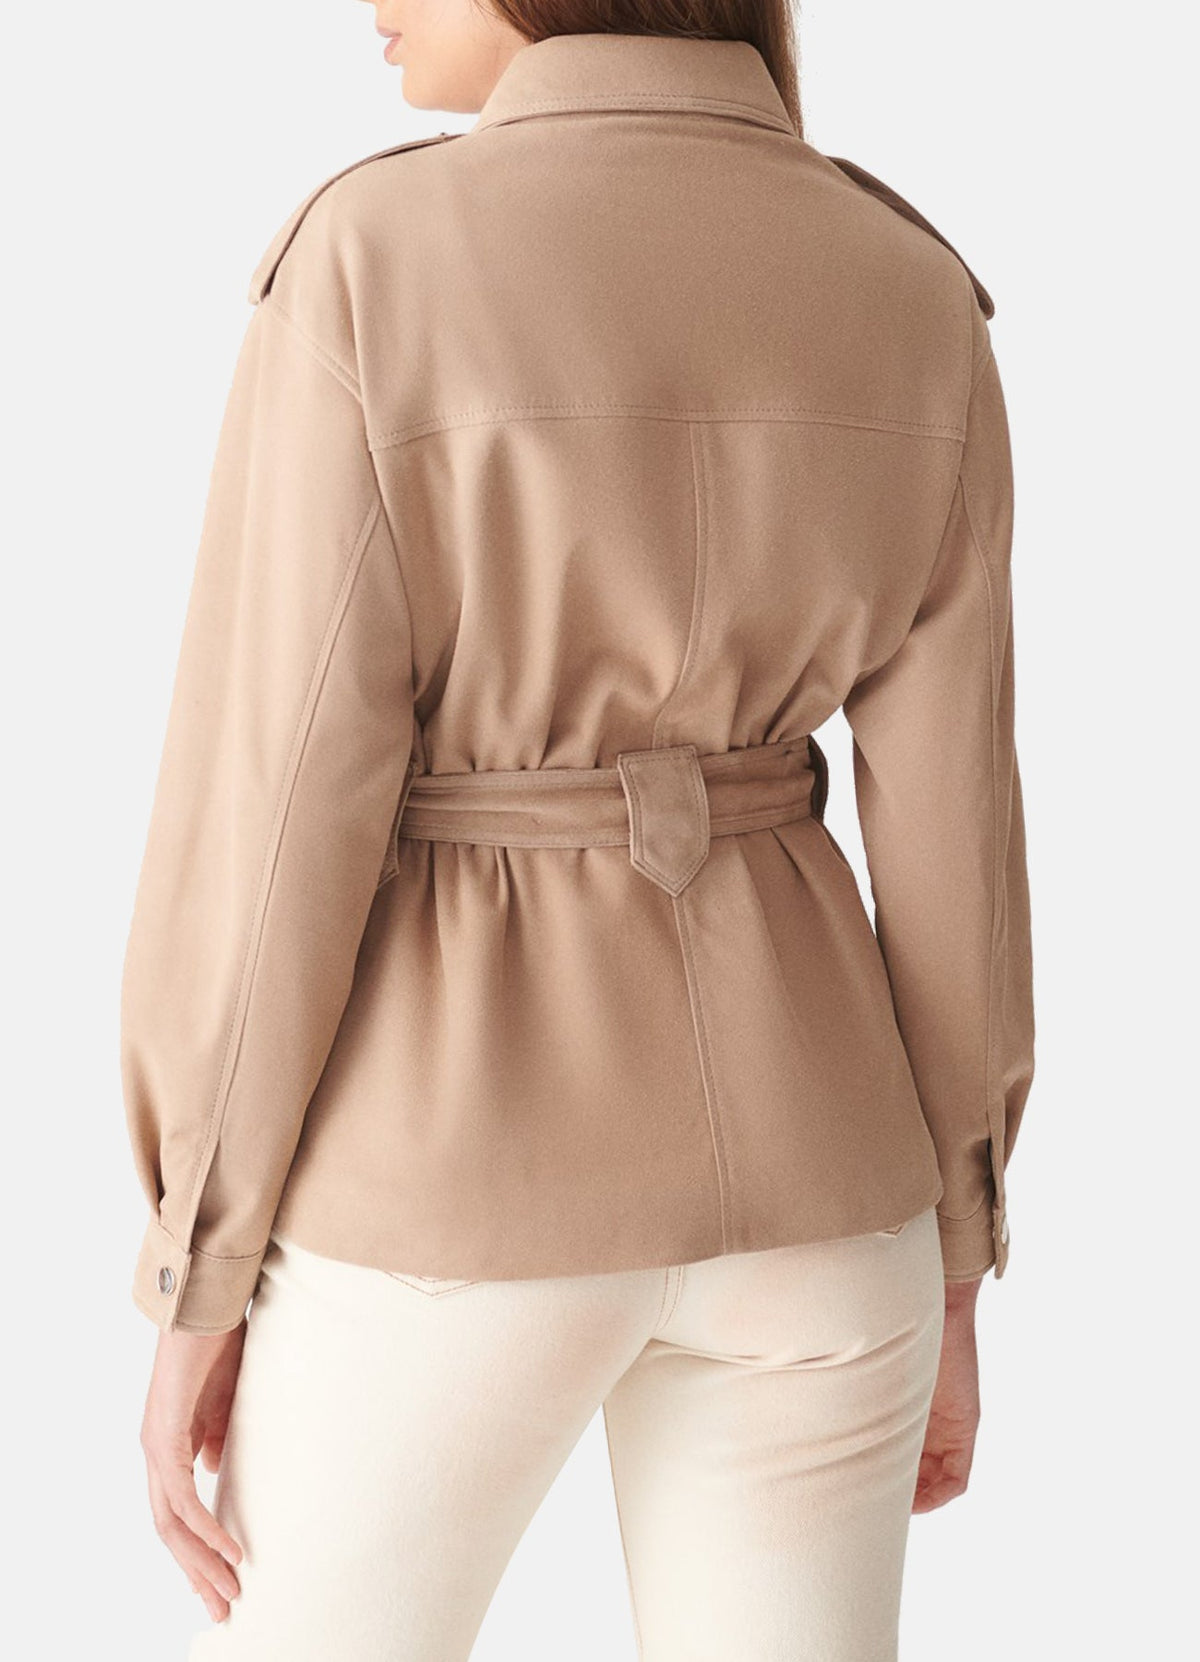 Womens Beige Long Length Suede Leather Jacket